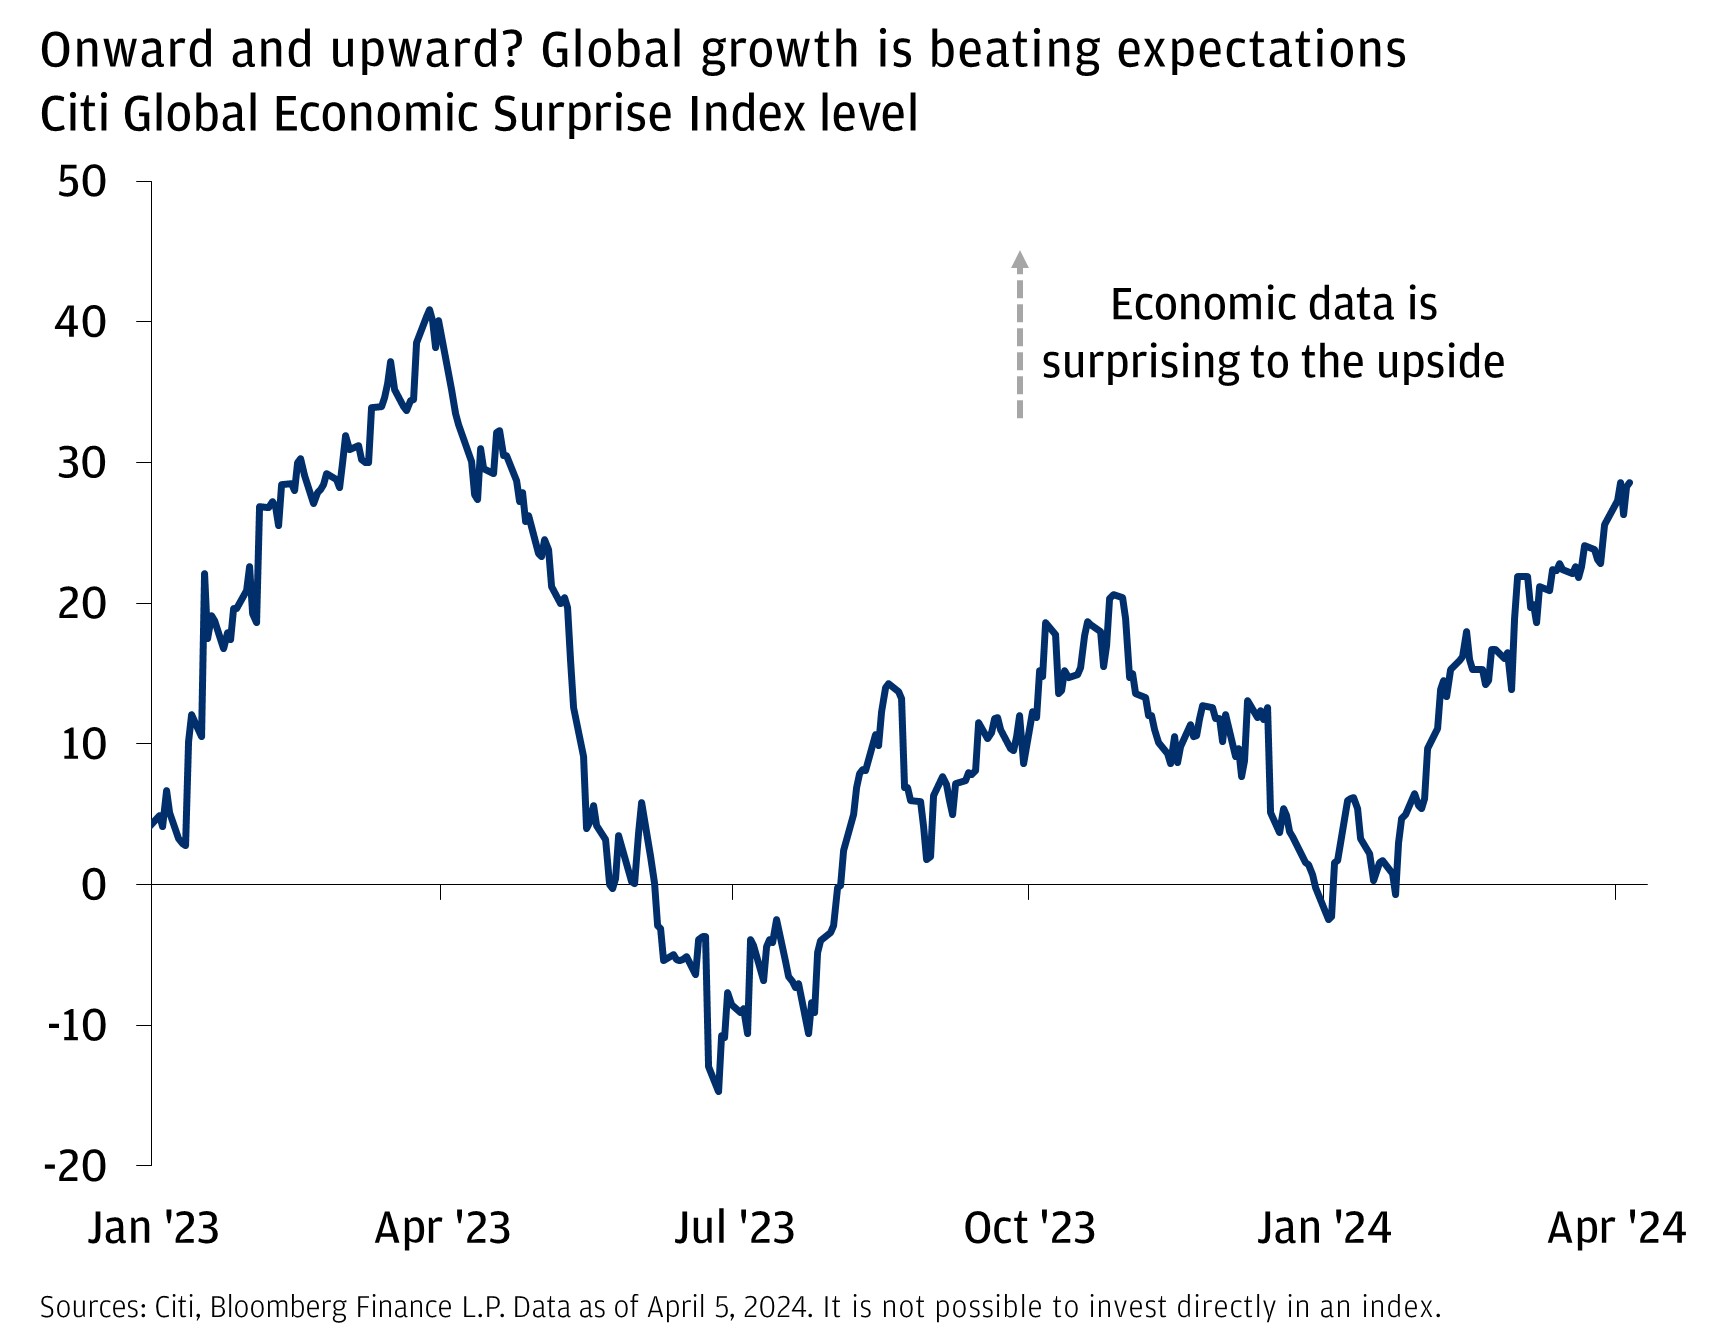 This chart shows the Citi Global Economic Surprise Index level from January 2023 through April of 2024.